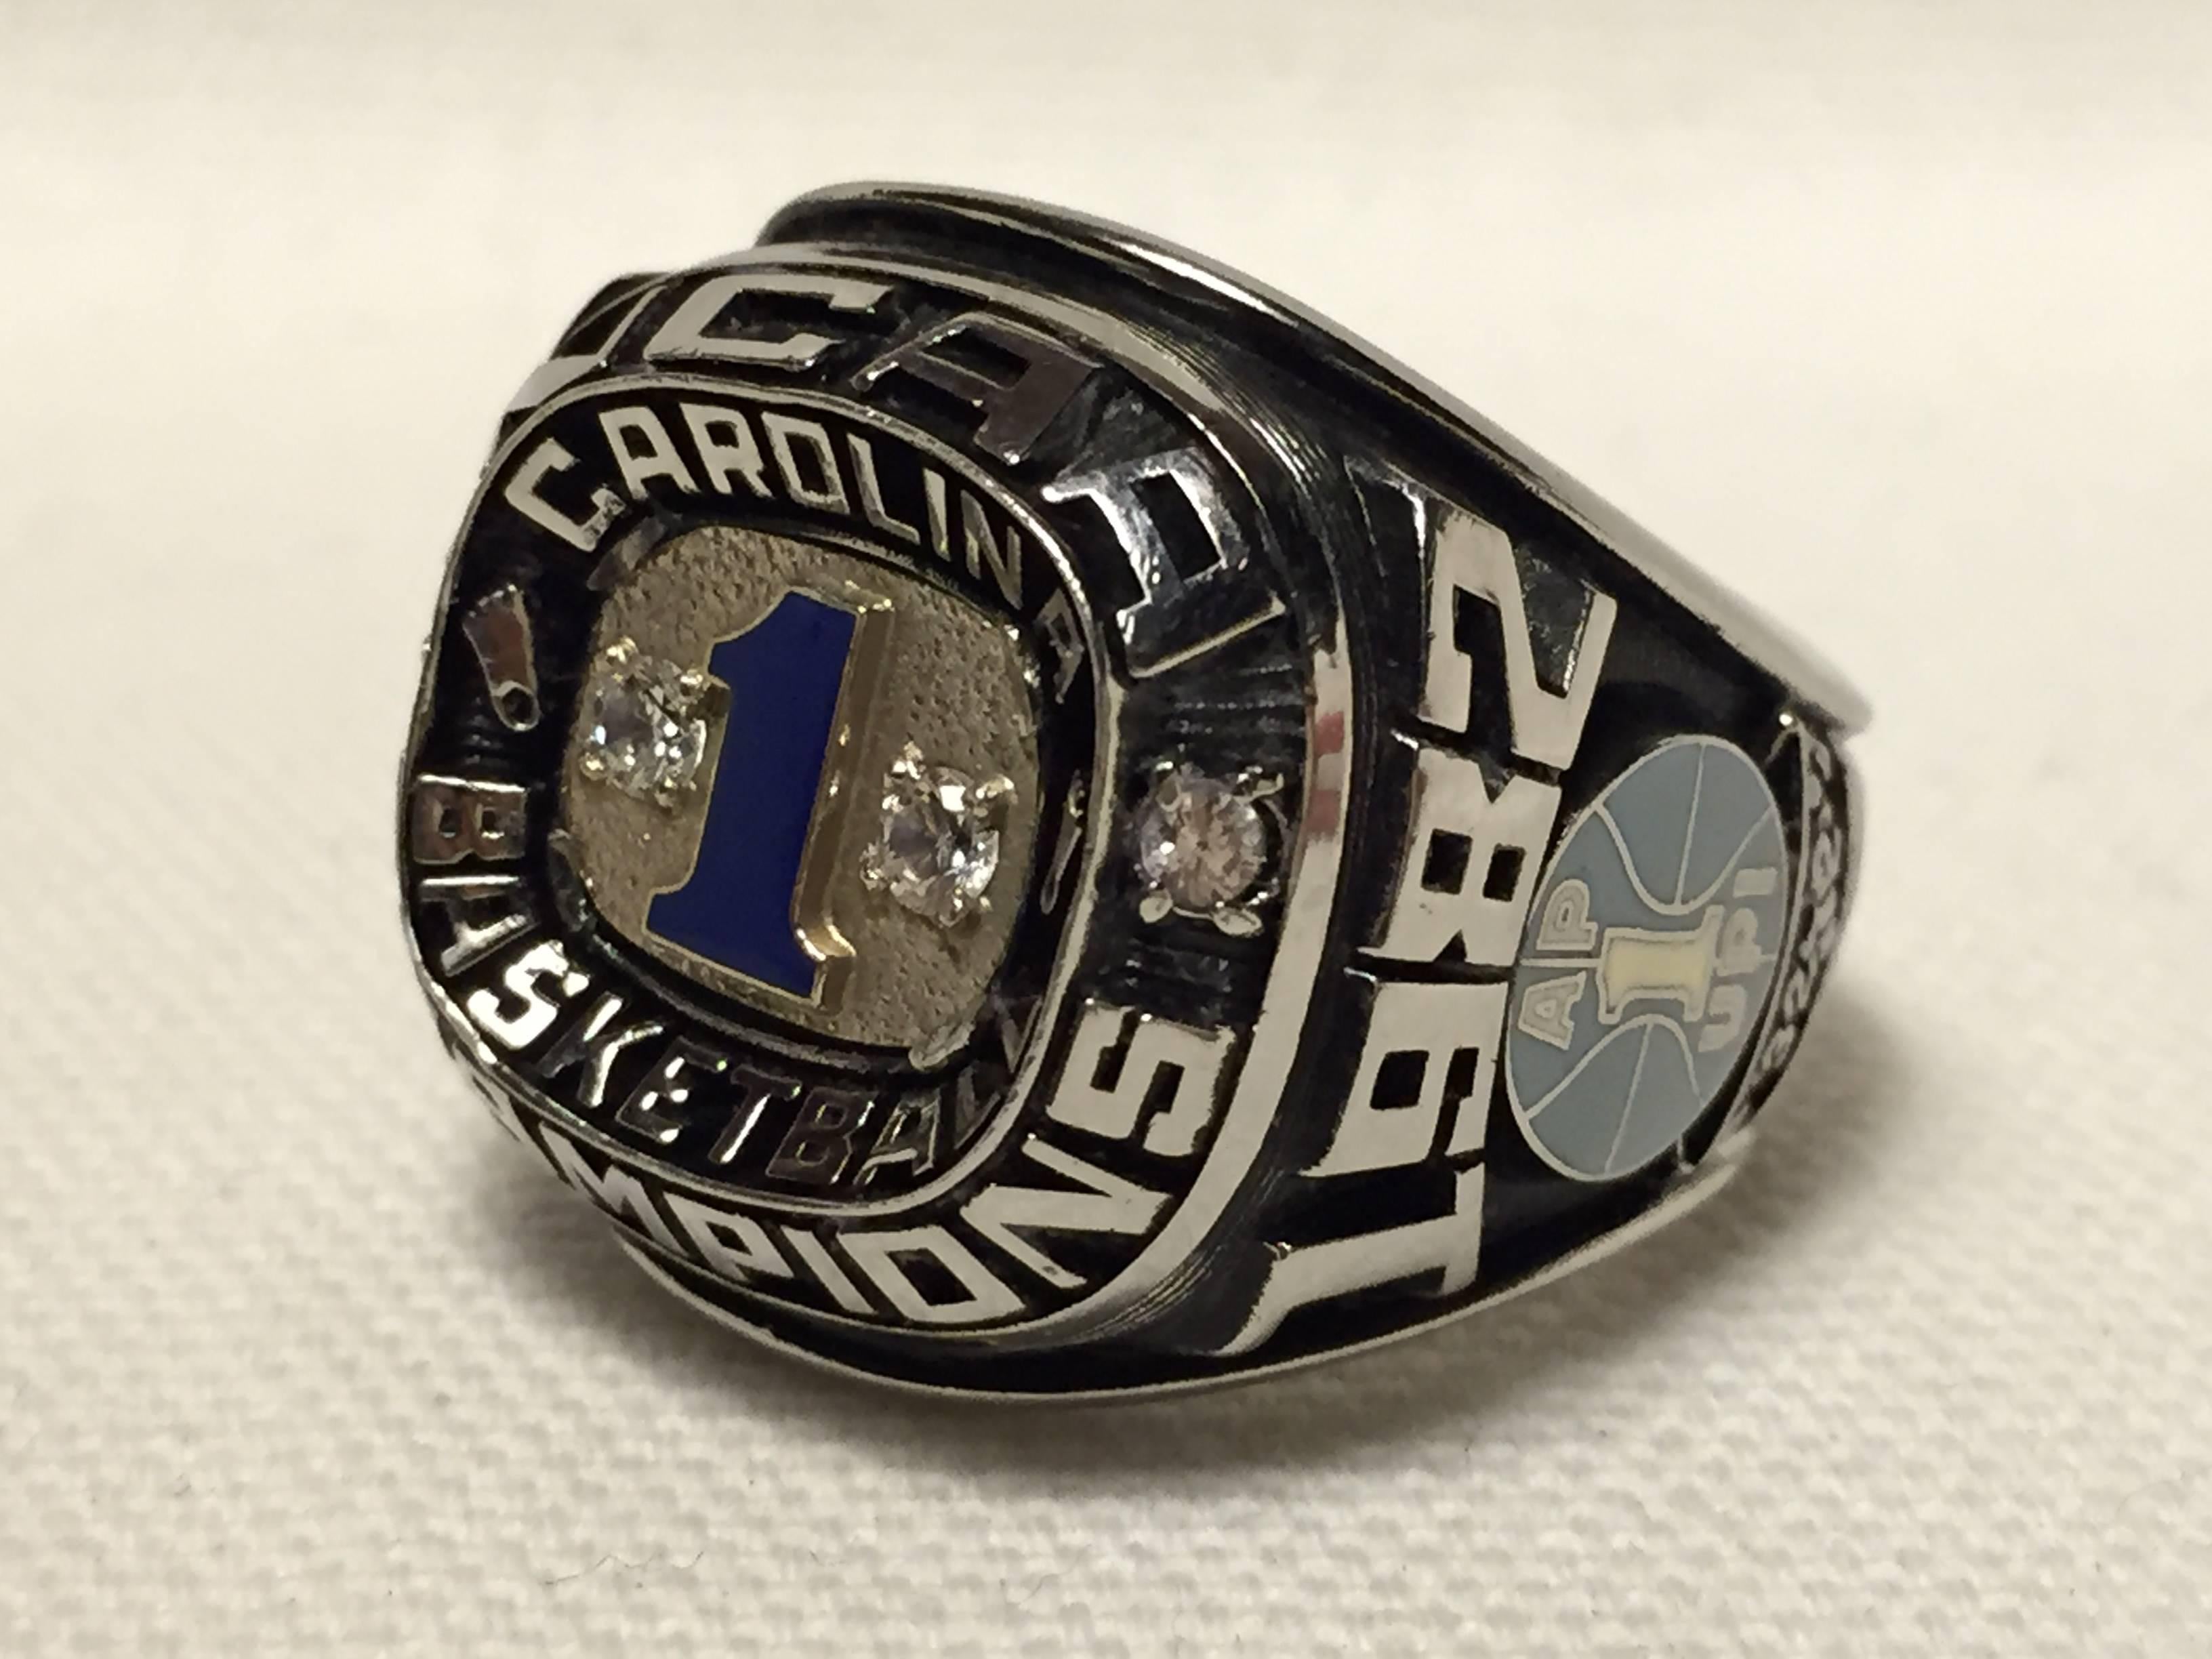 Authentic 1982 University of North Carolina basketball national championship salesman sample ring, size 10-11. Has HJ and serial number on the inside of the band, Herff Jones authenticated, guaranteed authentic.